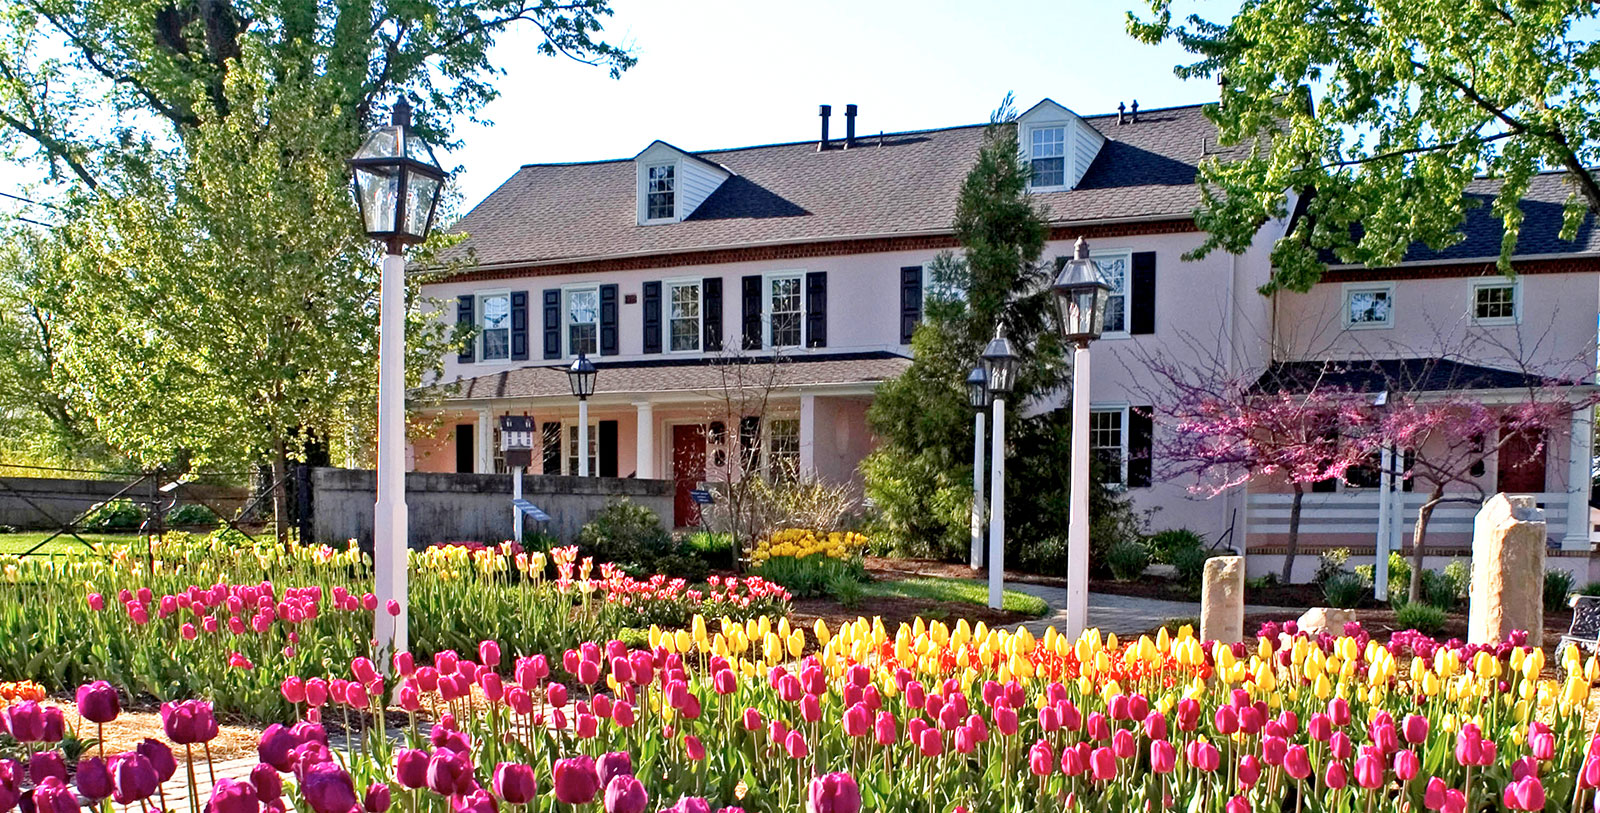 Image of Garden The Inn at Montchanin Village, 1799, Member of Historic Hotels of America, in Montchanin, Delaware